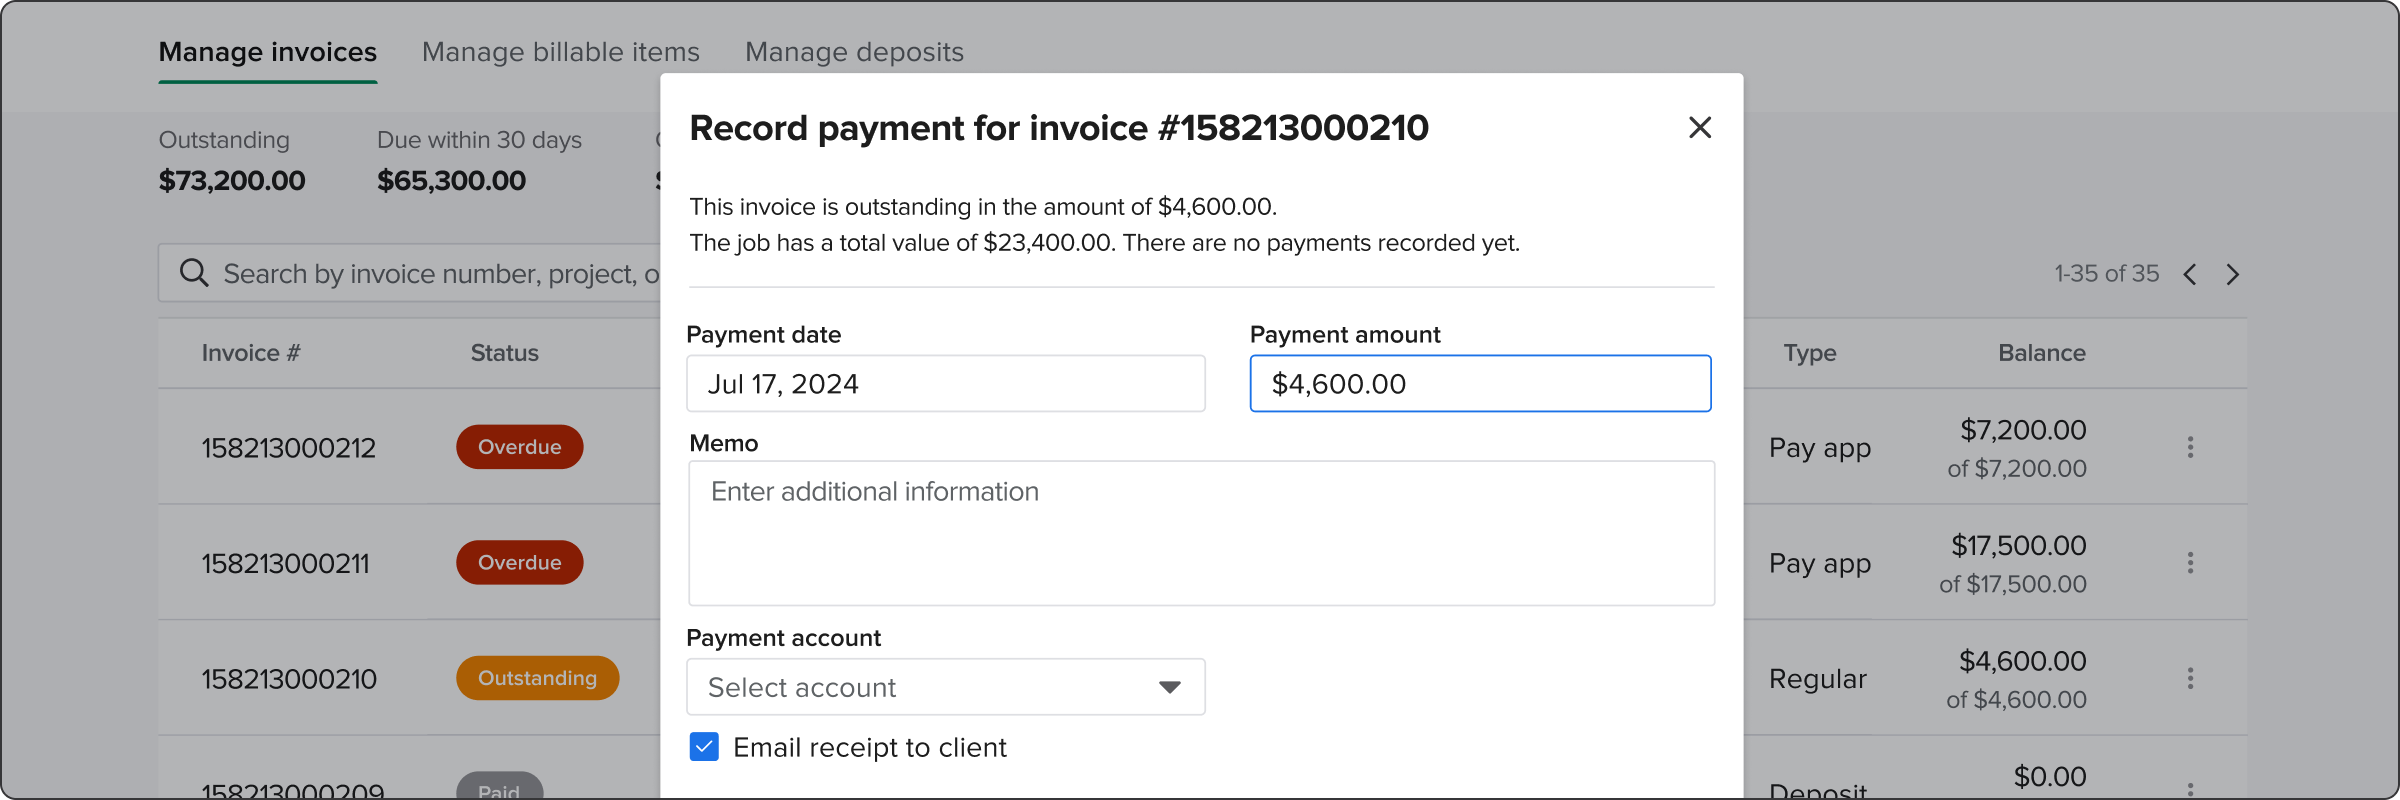 Product view displaying how to record payment for an outstanding invoice | HVAC contractor | Knowify